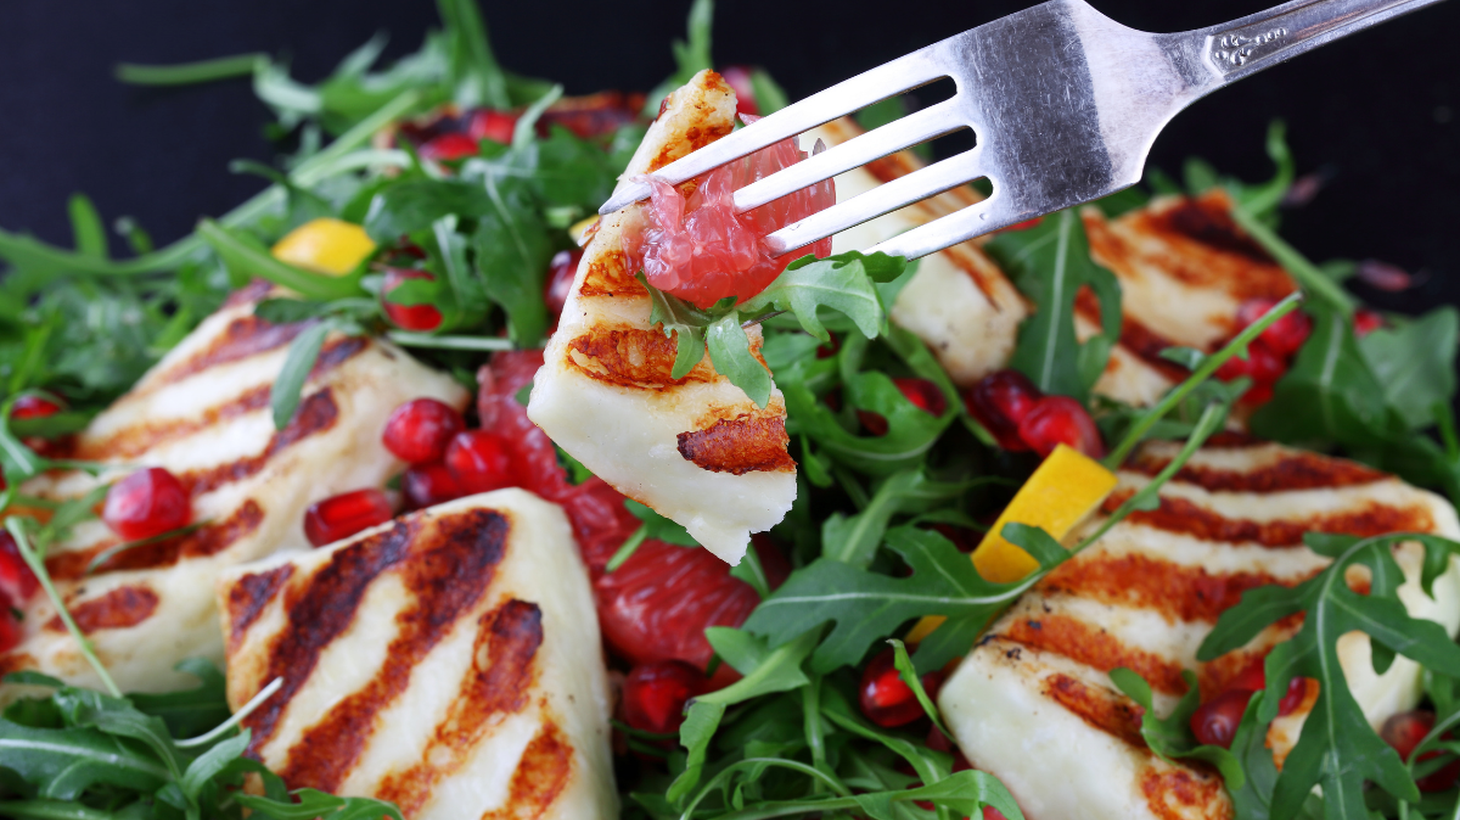 The Cypriot cheese halloumi can be grilled and is a perfect addition to salads.